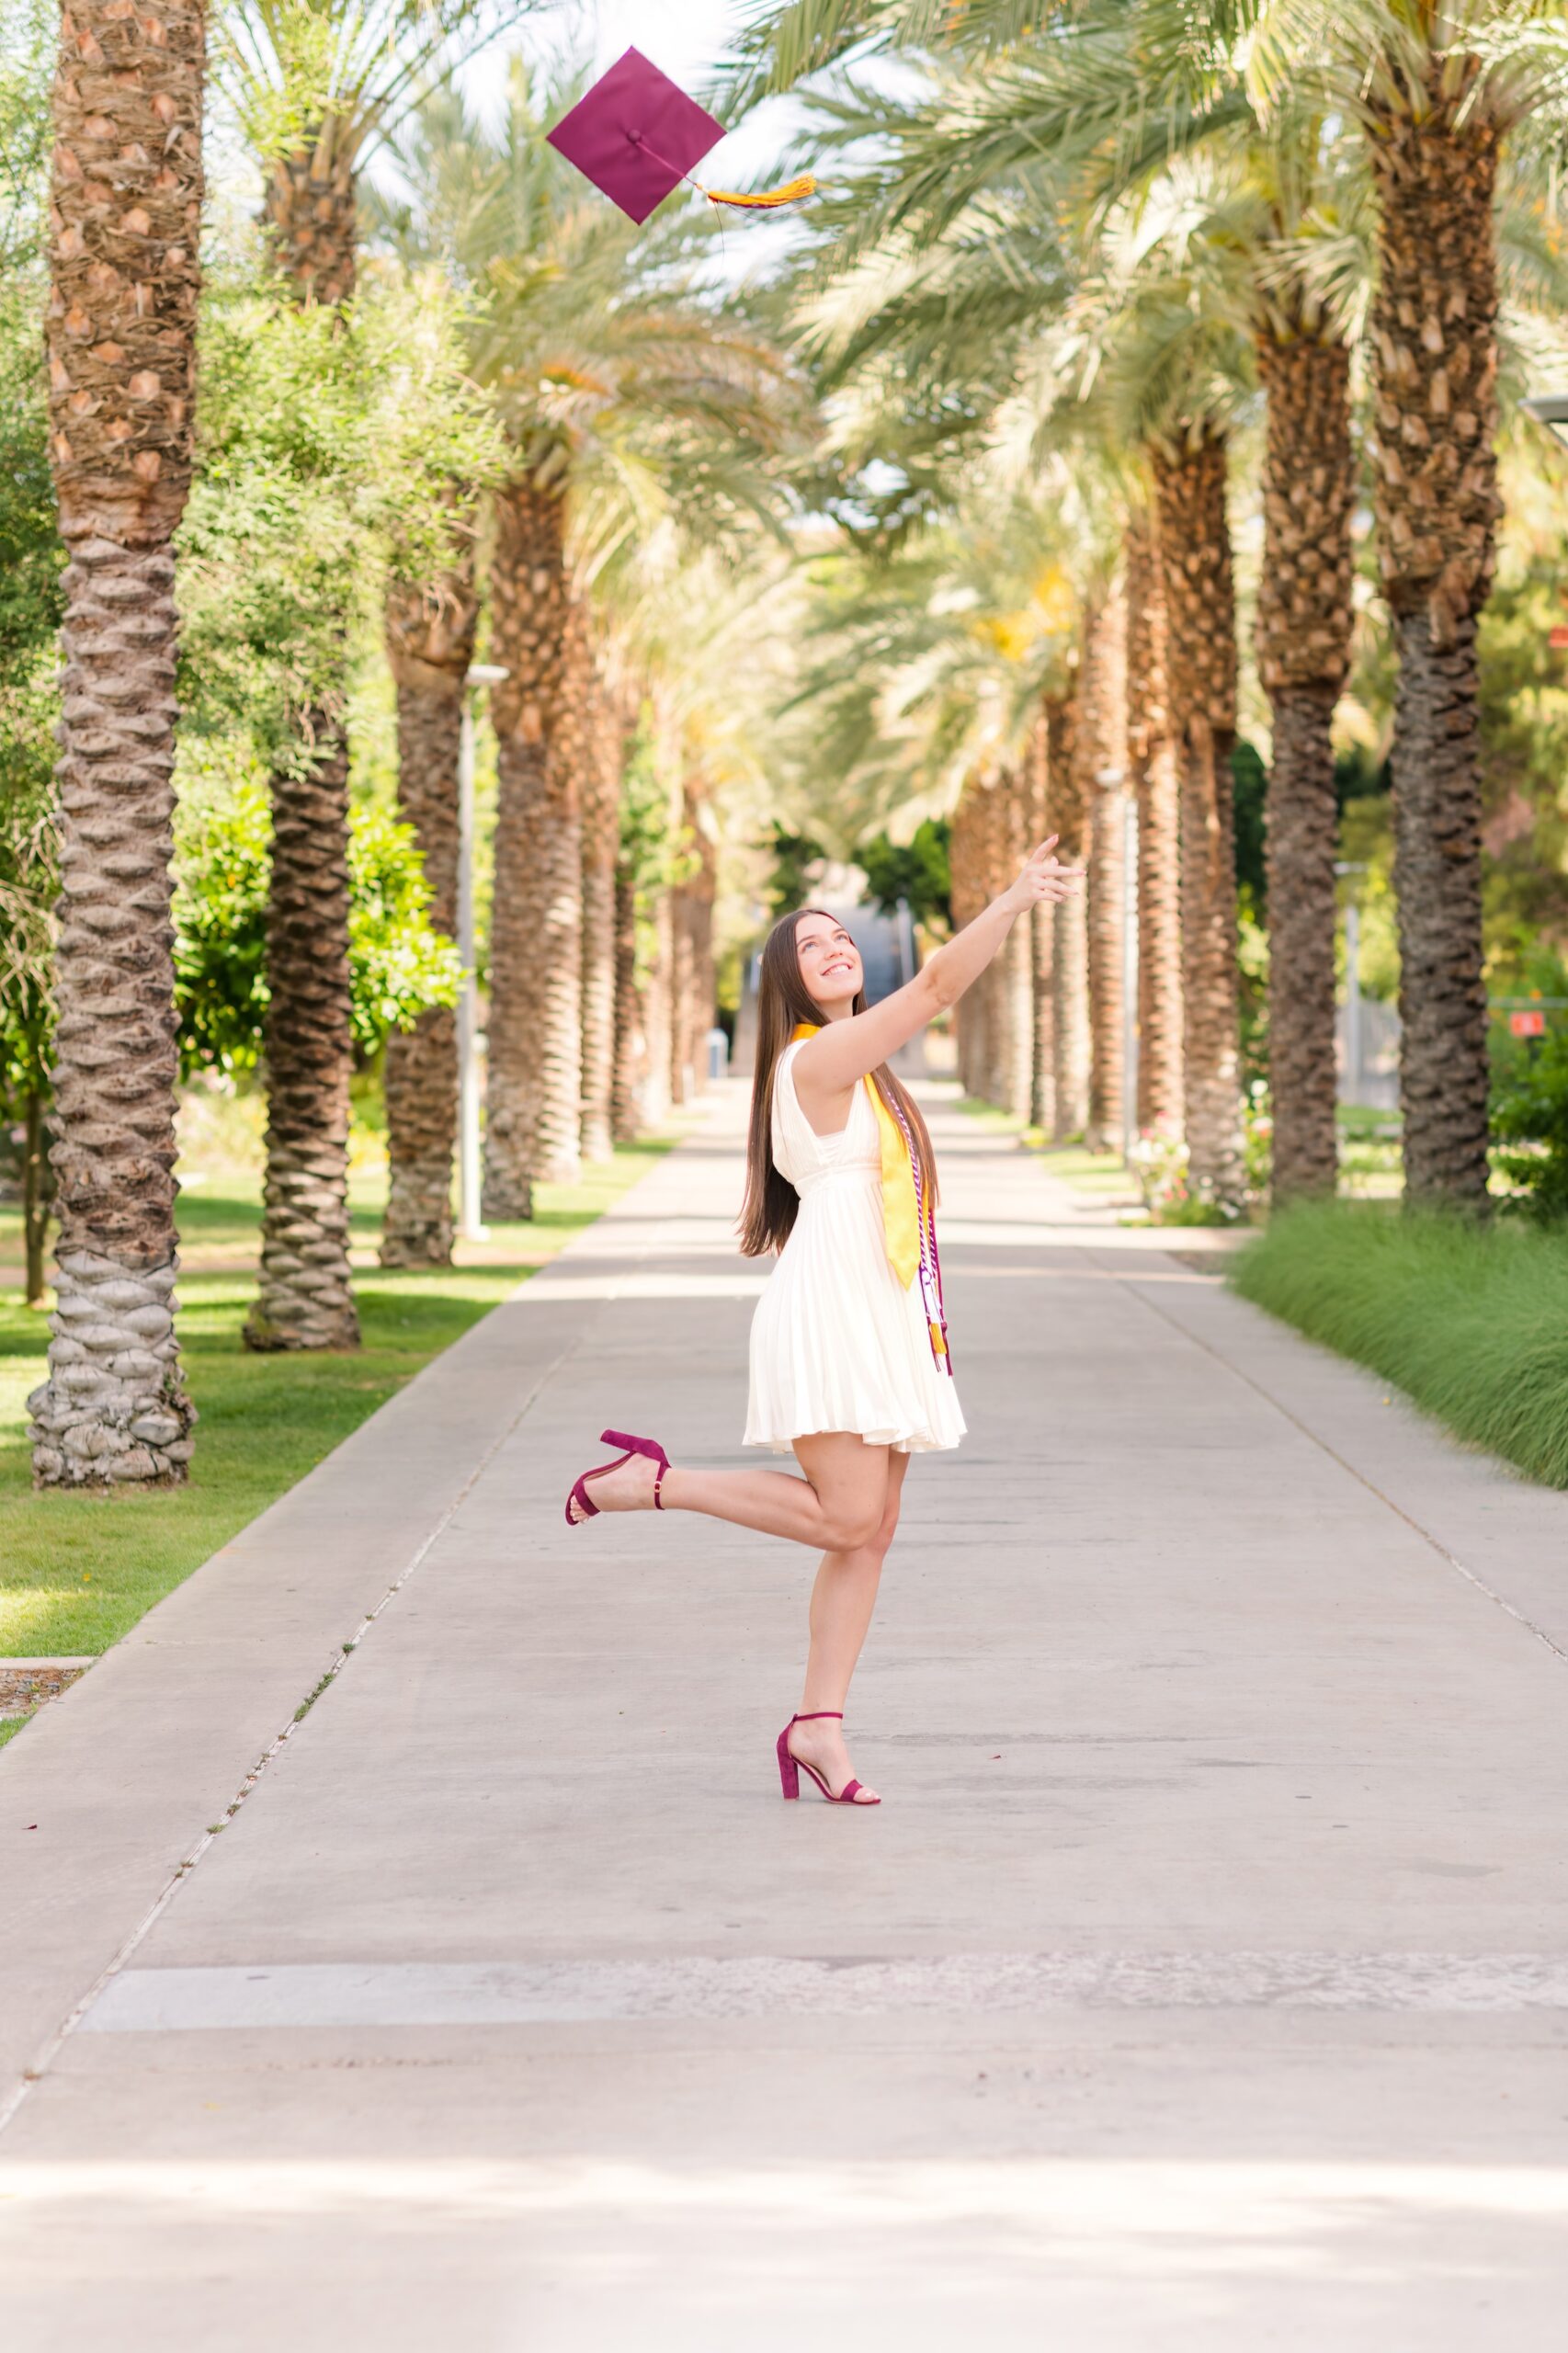 A senior at Arizona State University on Palm Walk throwing her maroon graduation hat into the air with her graduation cords around her neck in a white dress and maroon heals